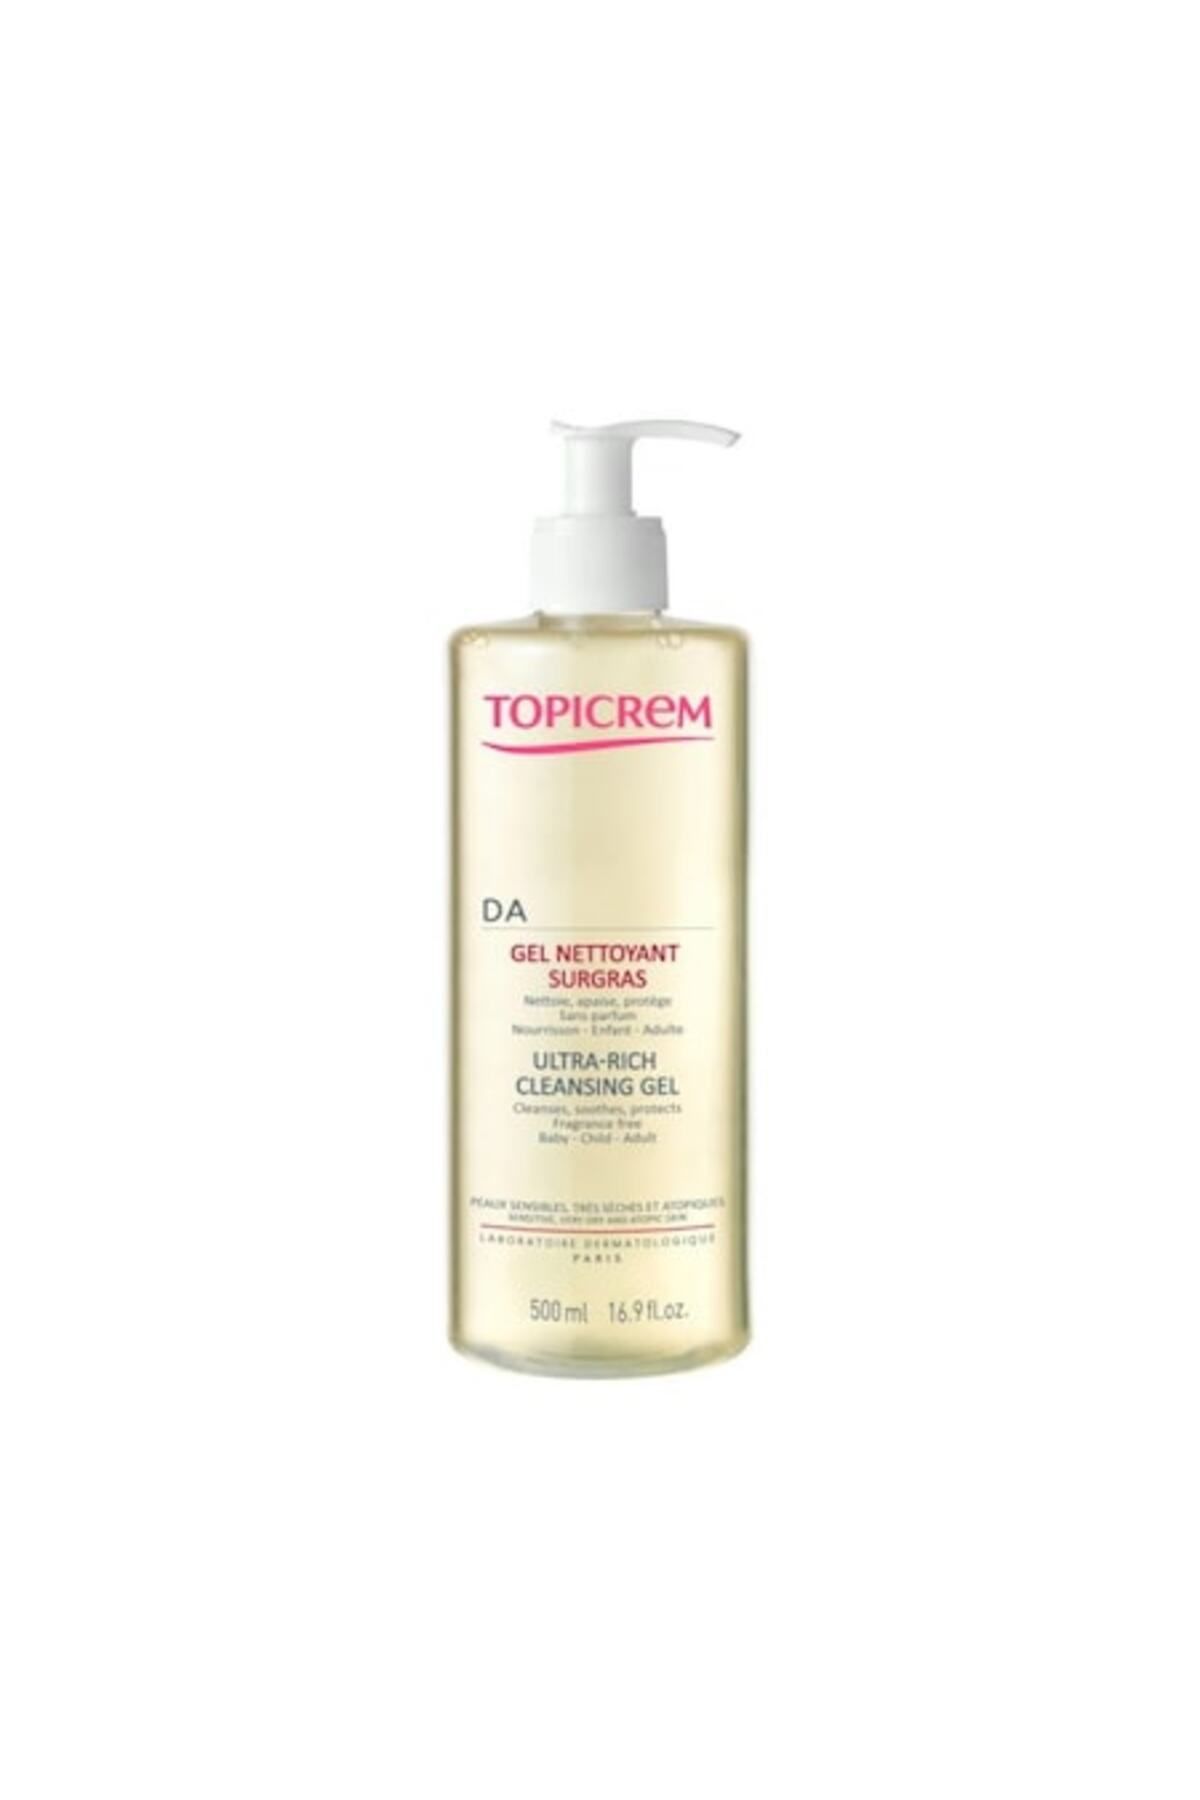 Topicrem Ad Ultra Rich Cleansing Gel Face And Body 500ml